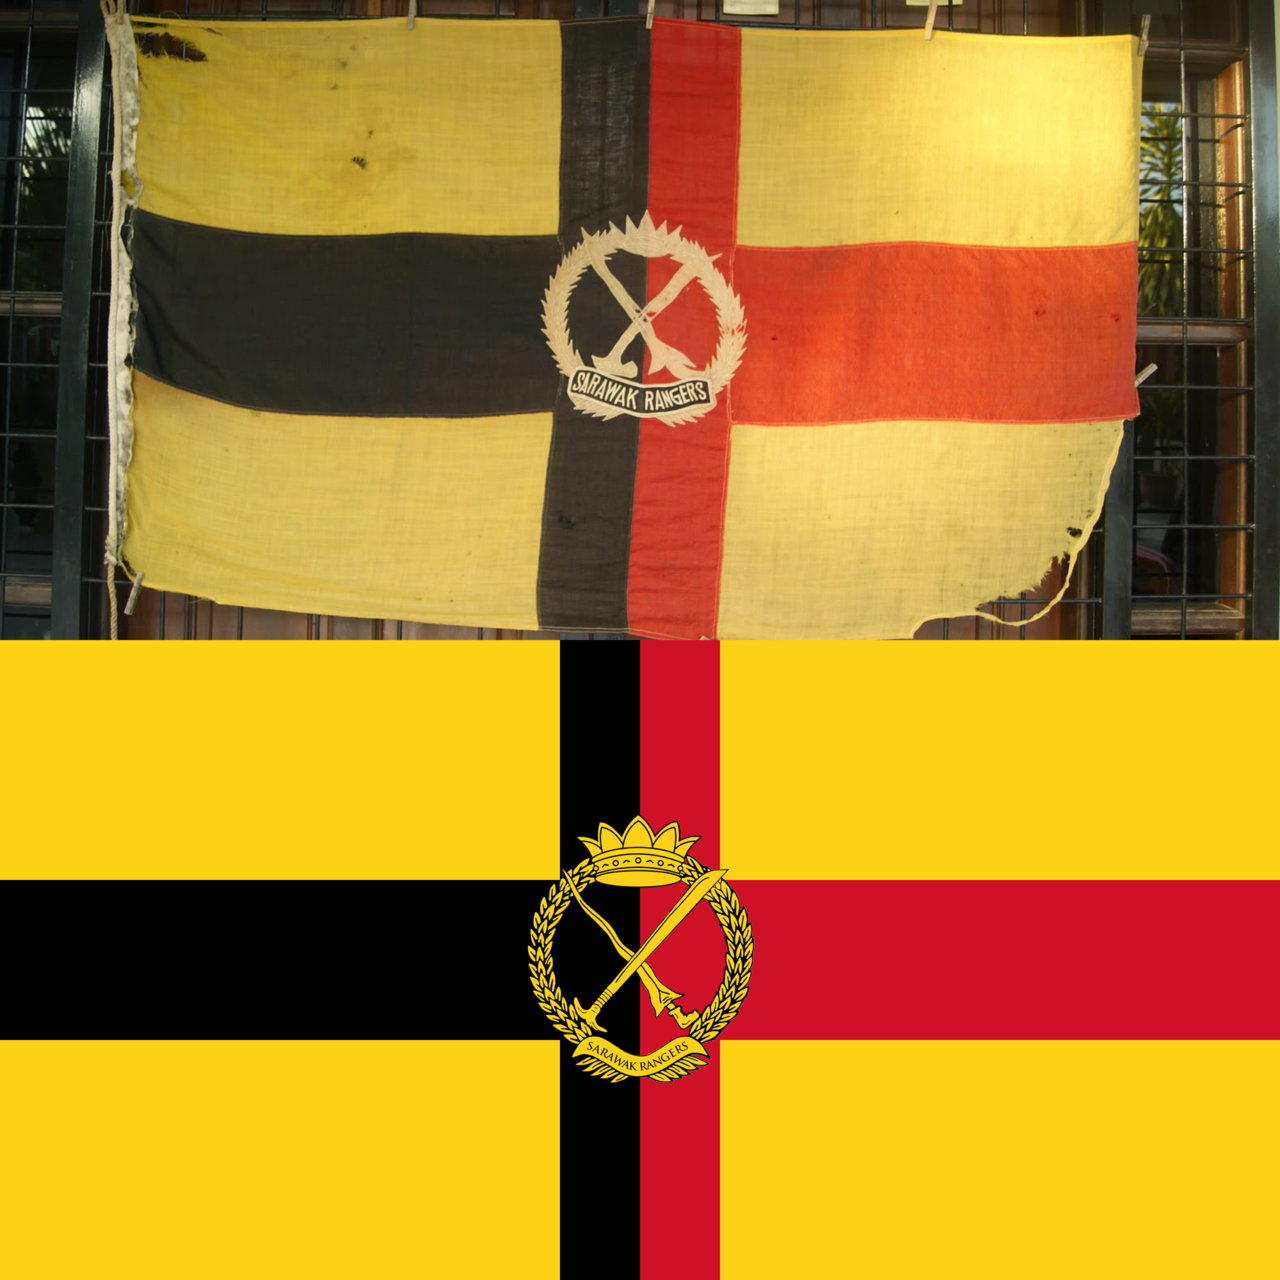 Digital recreation of the flag of Sarawak Rangers, a paramilitary force created during the Rajah Sir Charles Brooke period in Sarawak, with IRL flag. from /r/vexillology
Top comment: What was behind the choice to not recreate the text in the same...